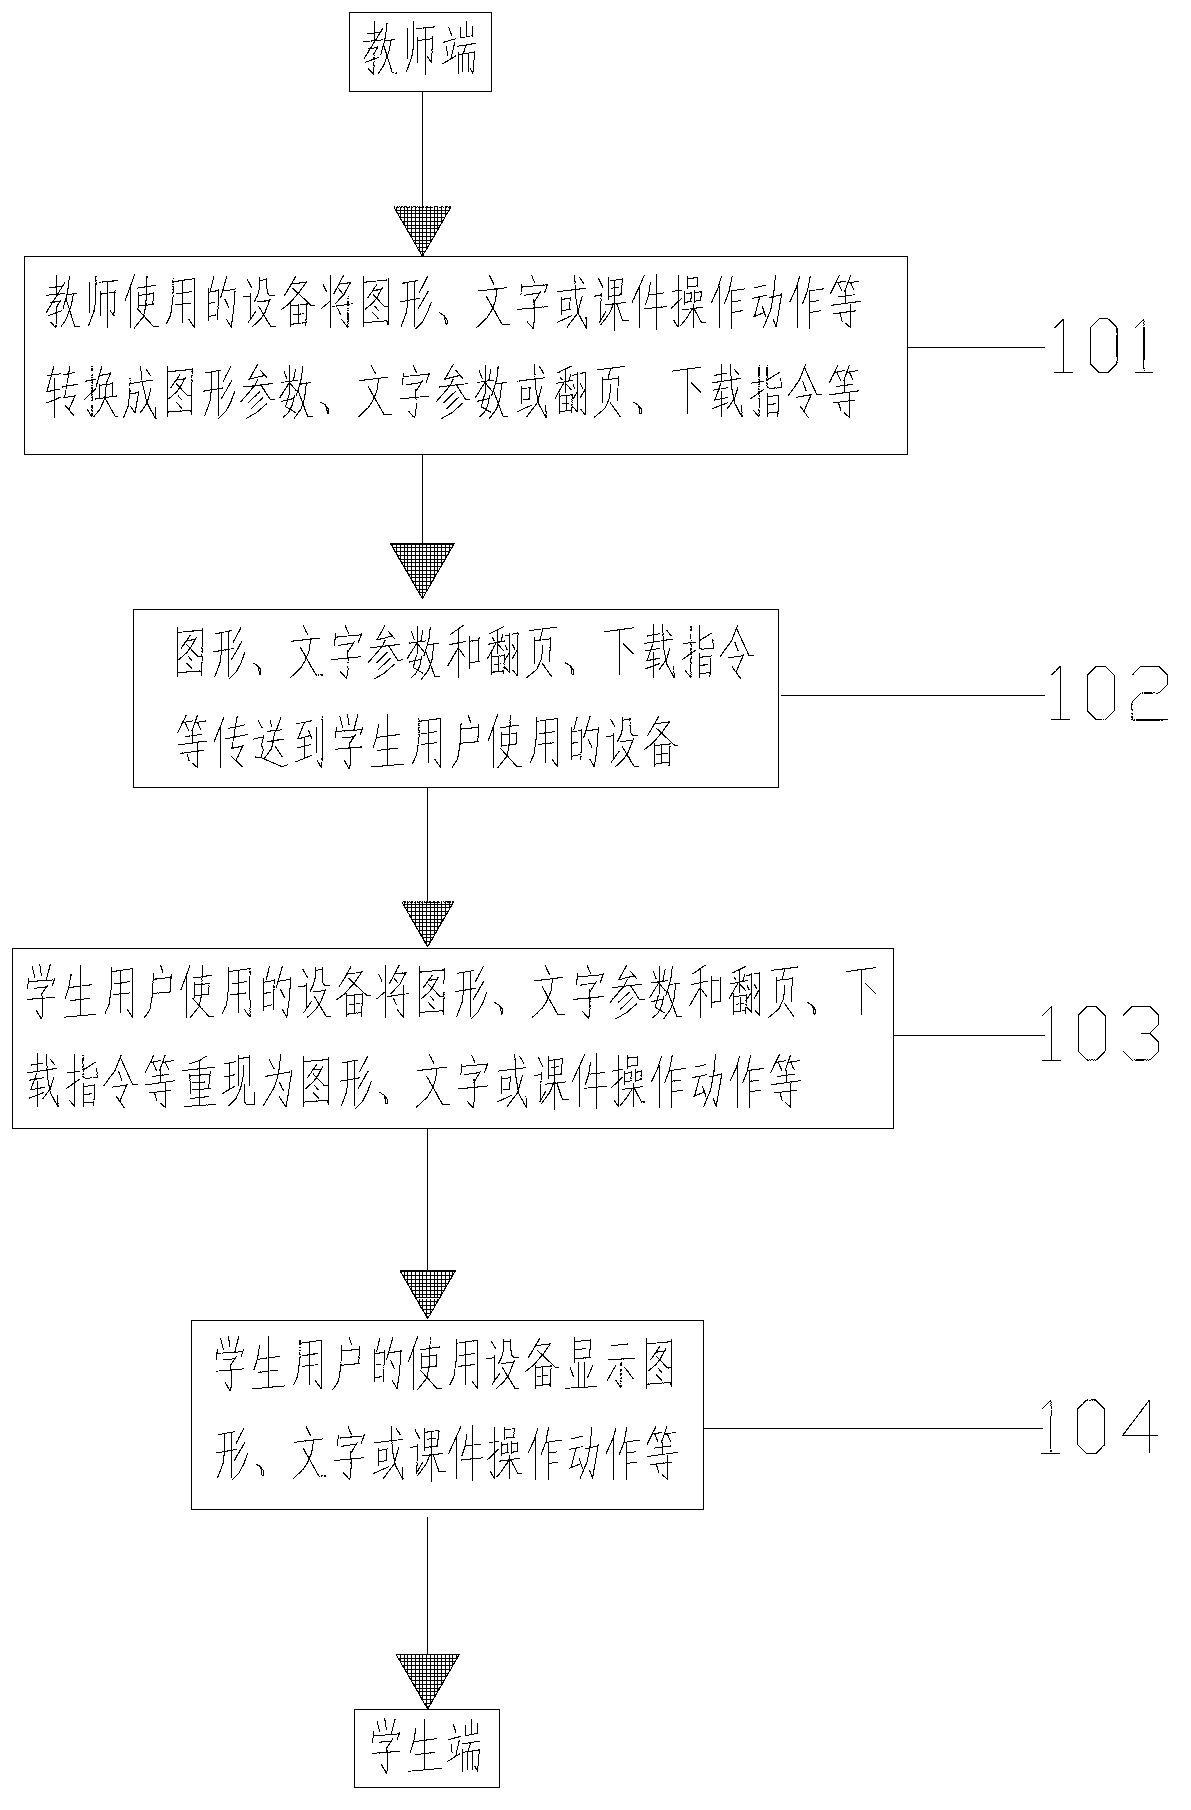 Information interaction method and system for distance education